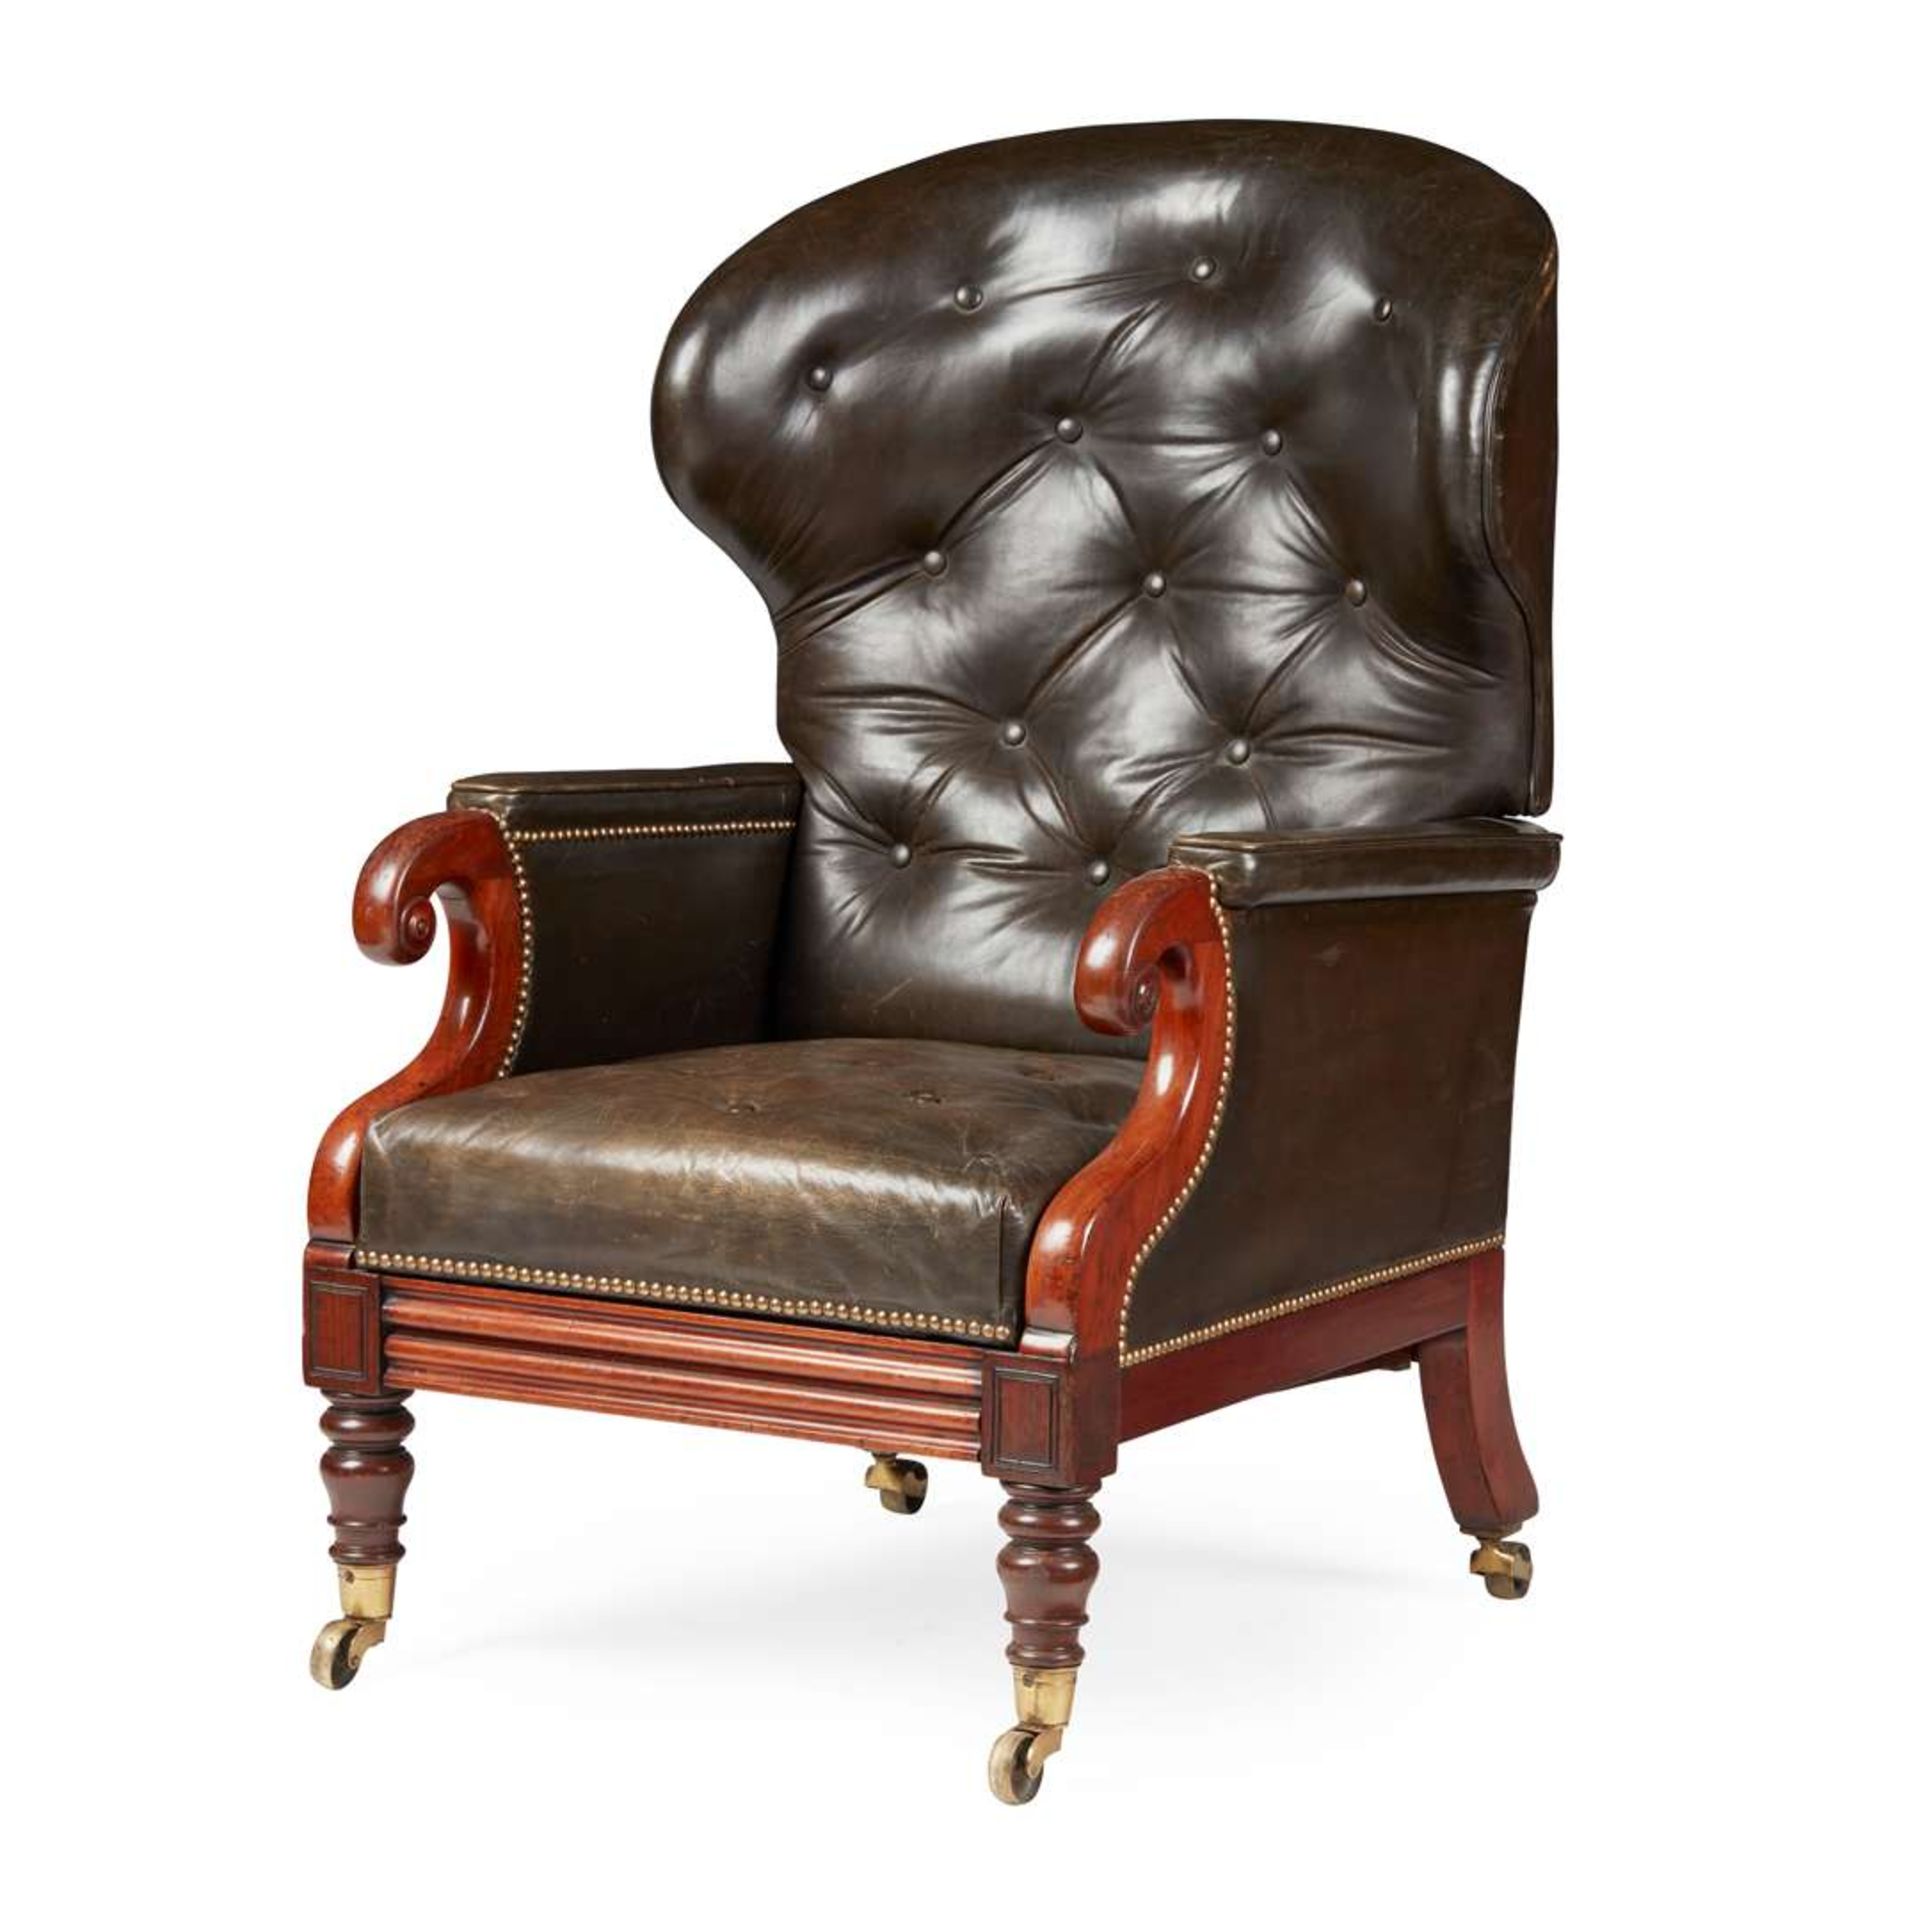 WILLIAM IV MAHOGANY LEATHER UPHOLSTERED RECLINING ARMCHAIR - Image 2 of 3